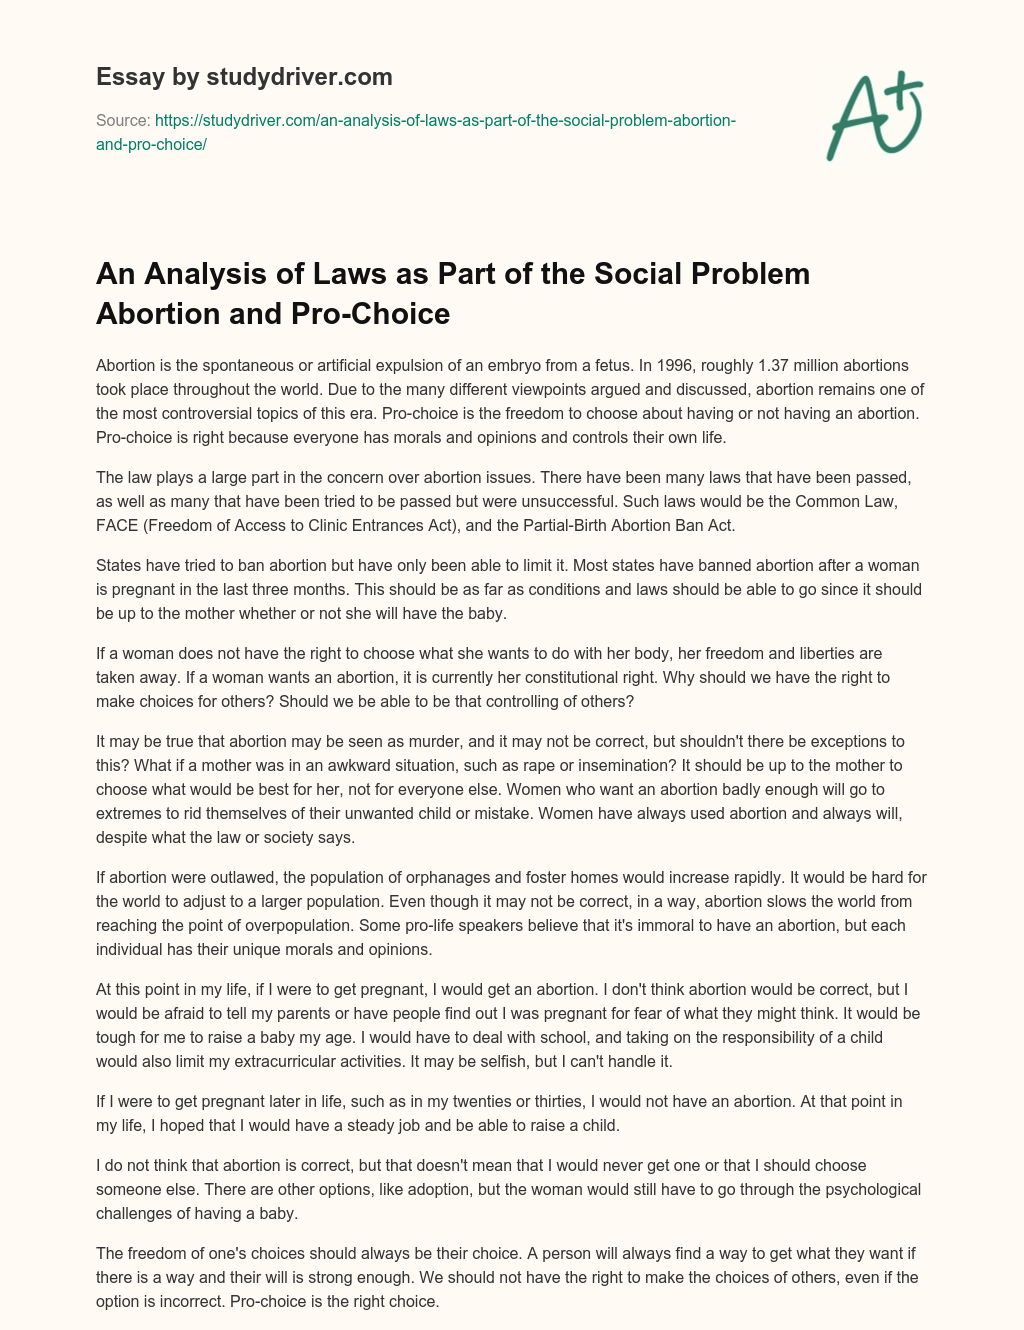 An Analysis of Laws as Part of the Social Problem Abortion and Pro-Choice essay